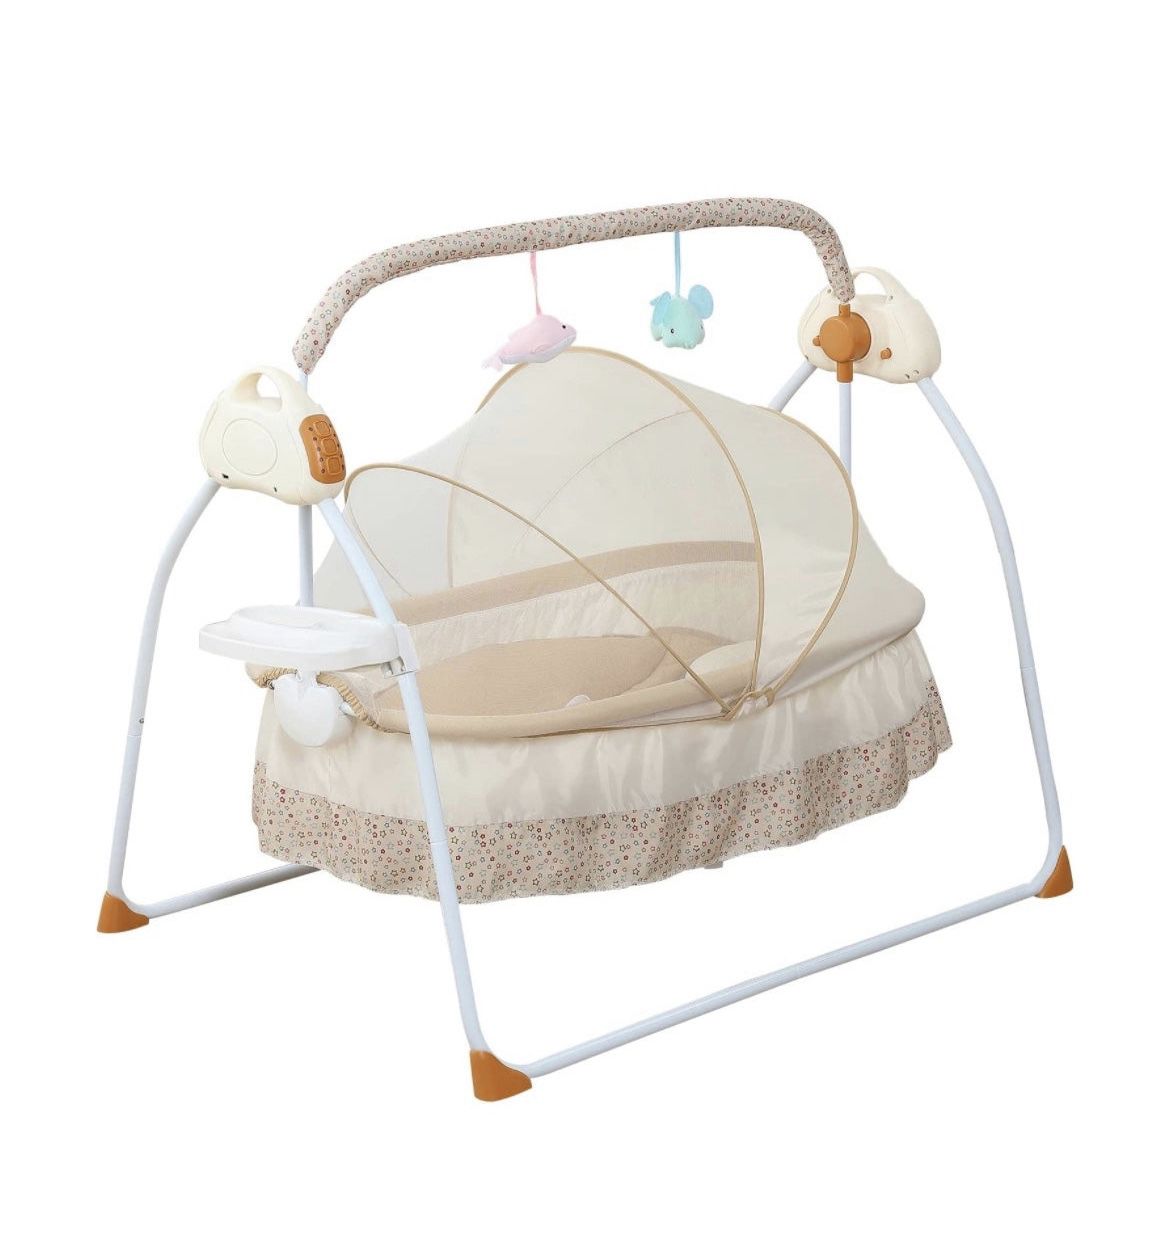 Electric Baby Crib Cradle, 0-18 Months Infant Bed Auto Swing #3732